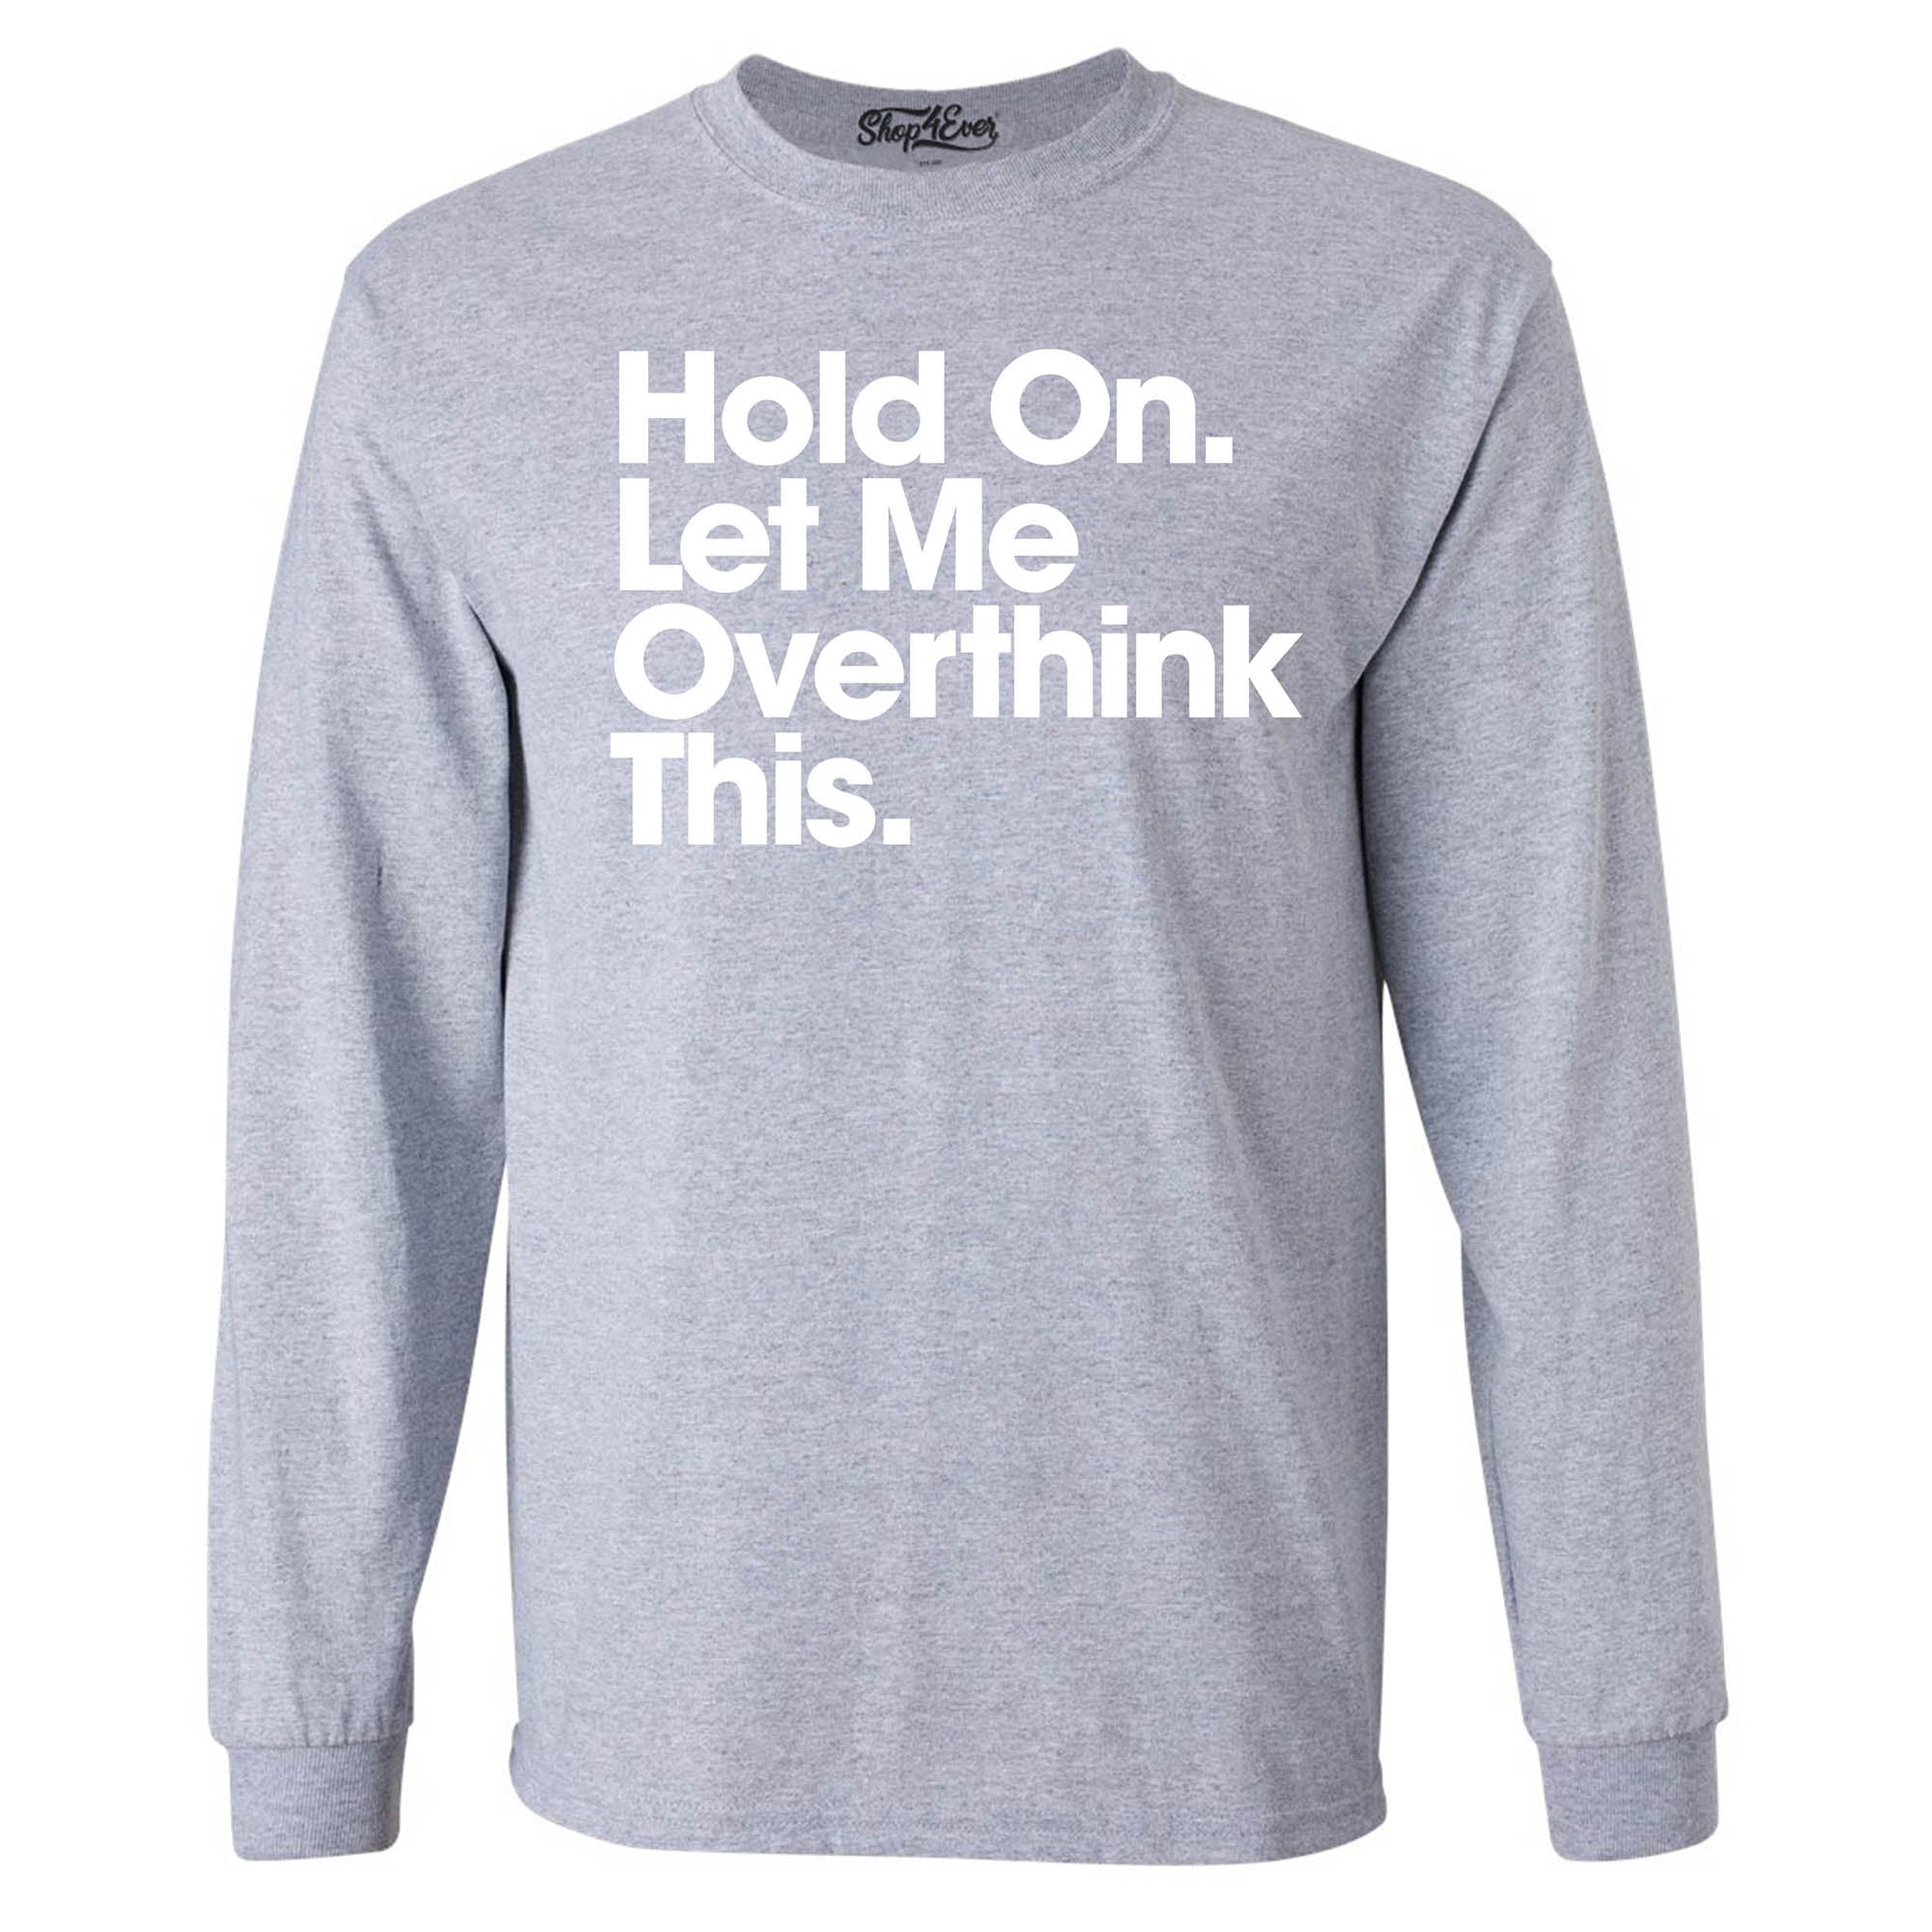 Hold On. Let Me Overthink This. Long Sleeve Shirt